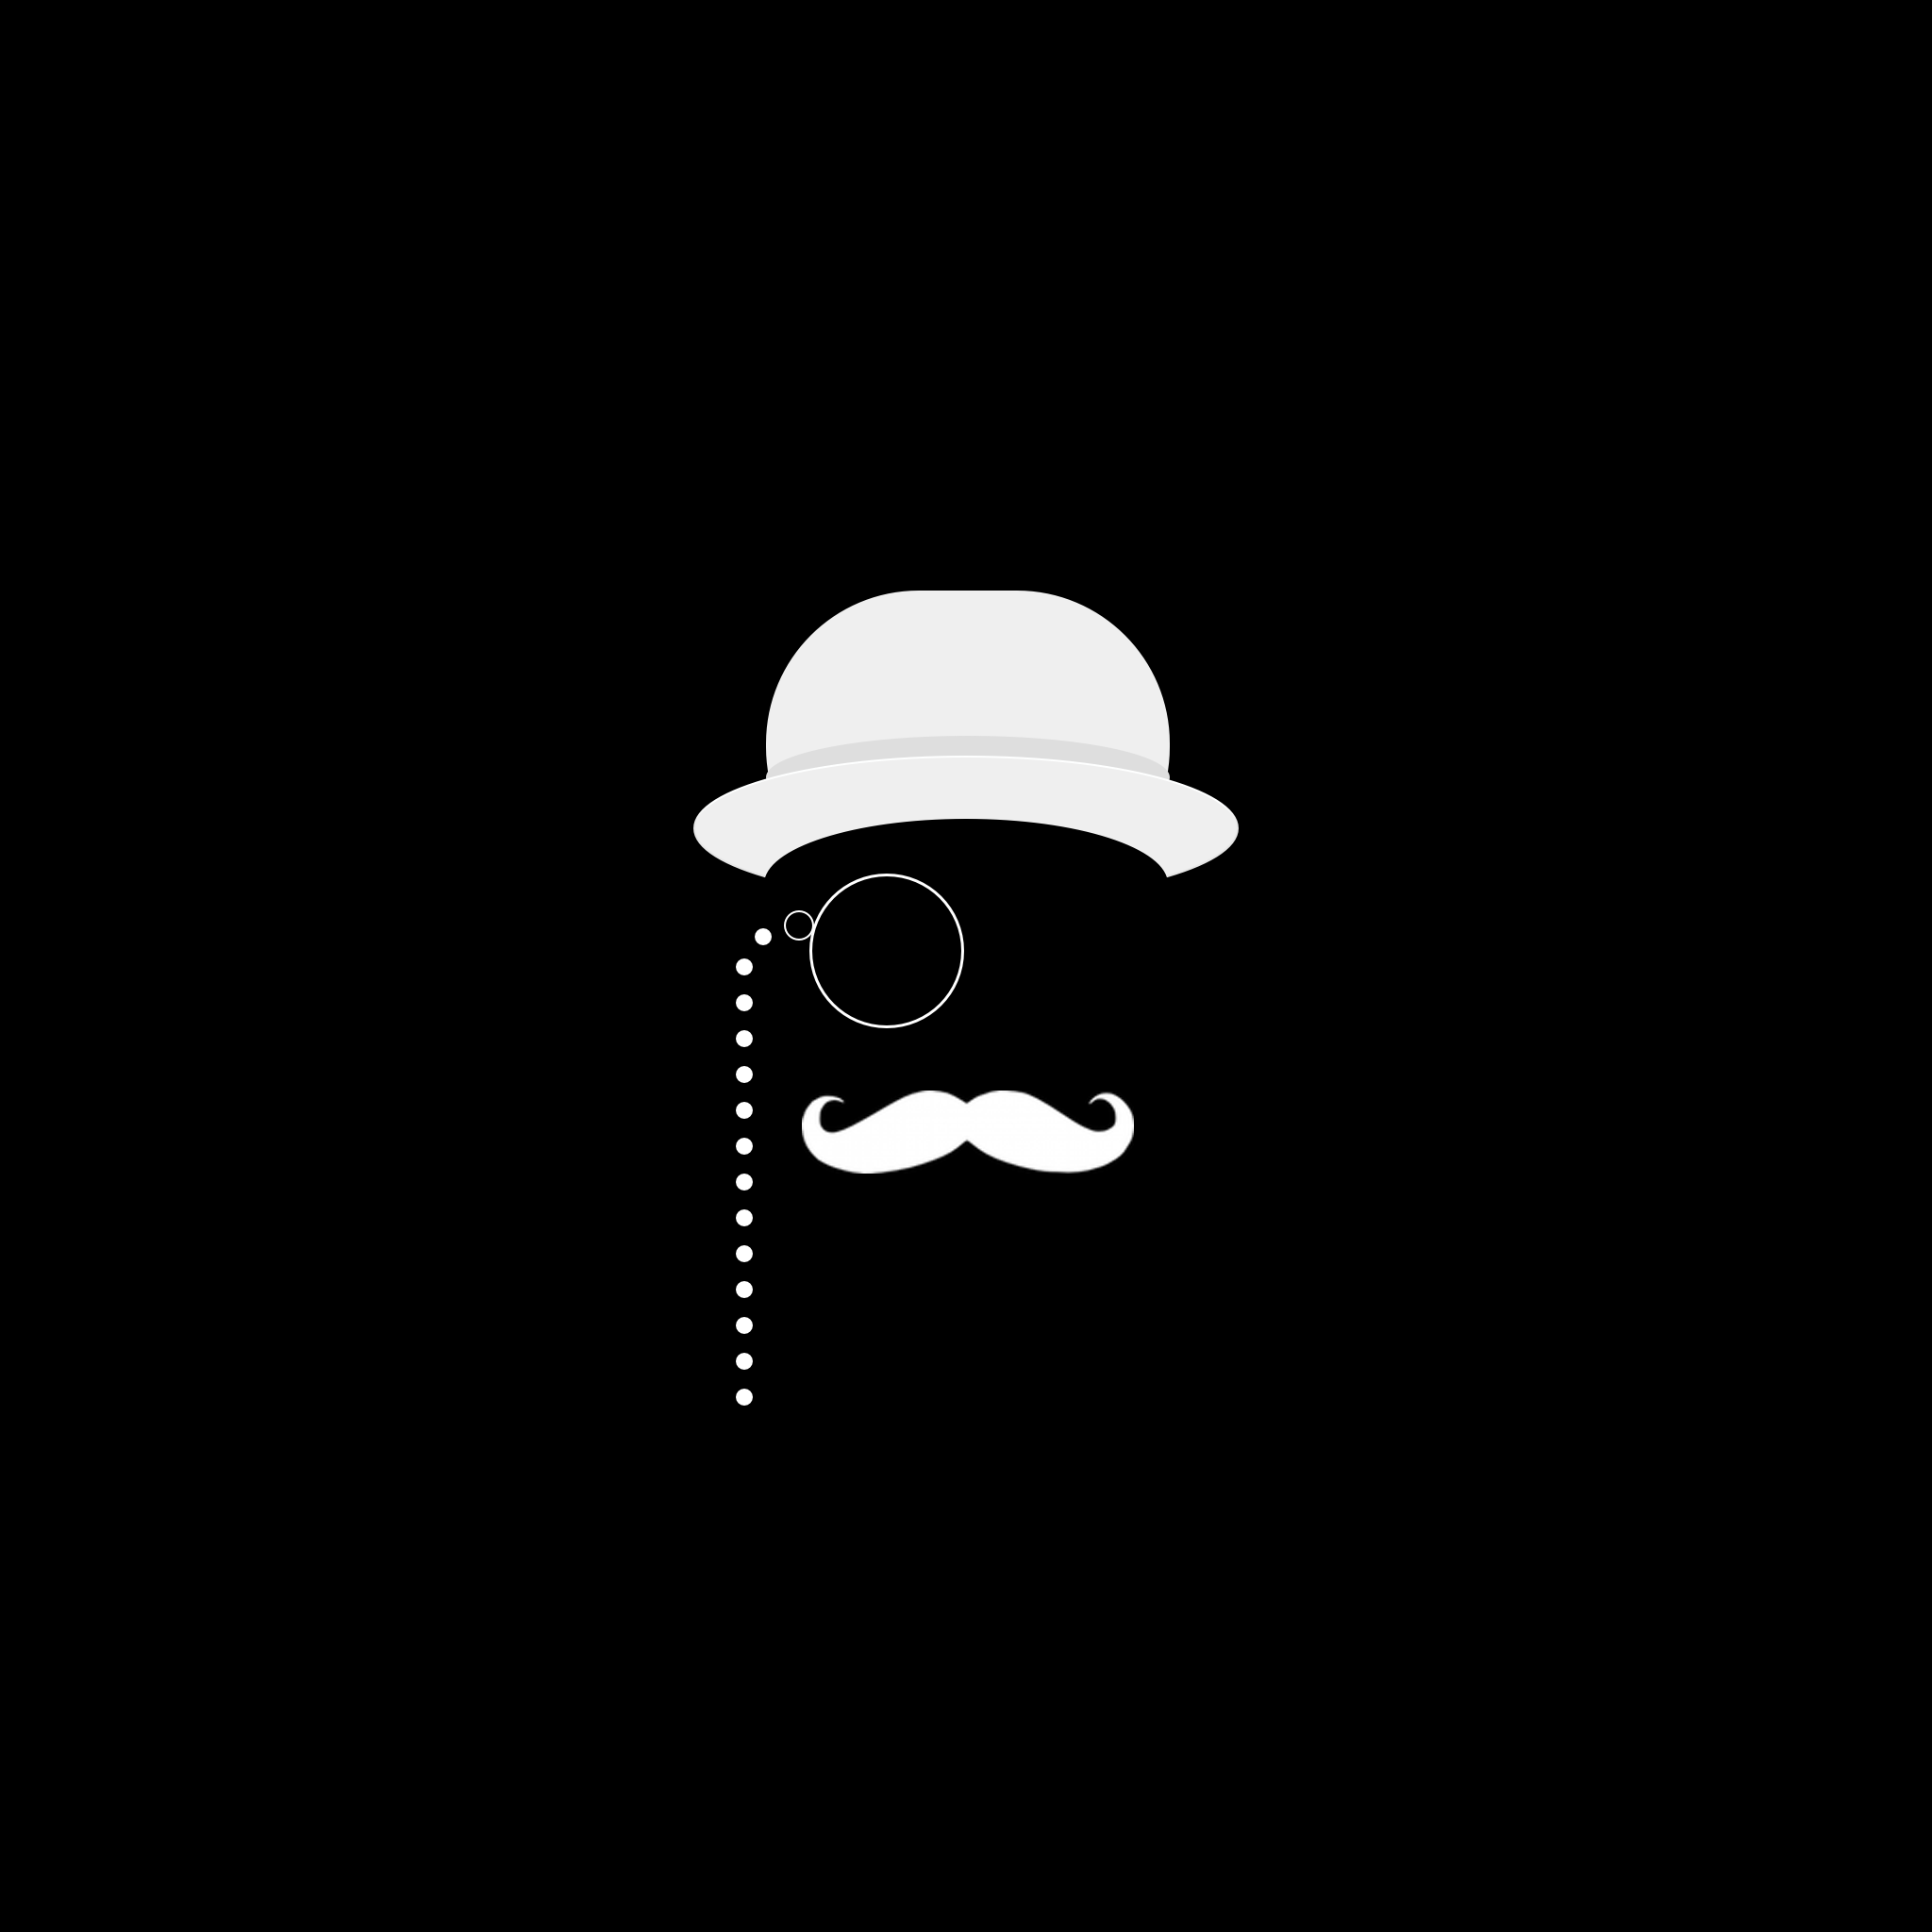 Wallpapers of the week: Movember